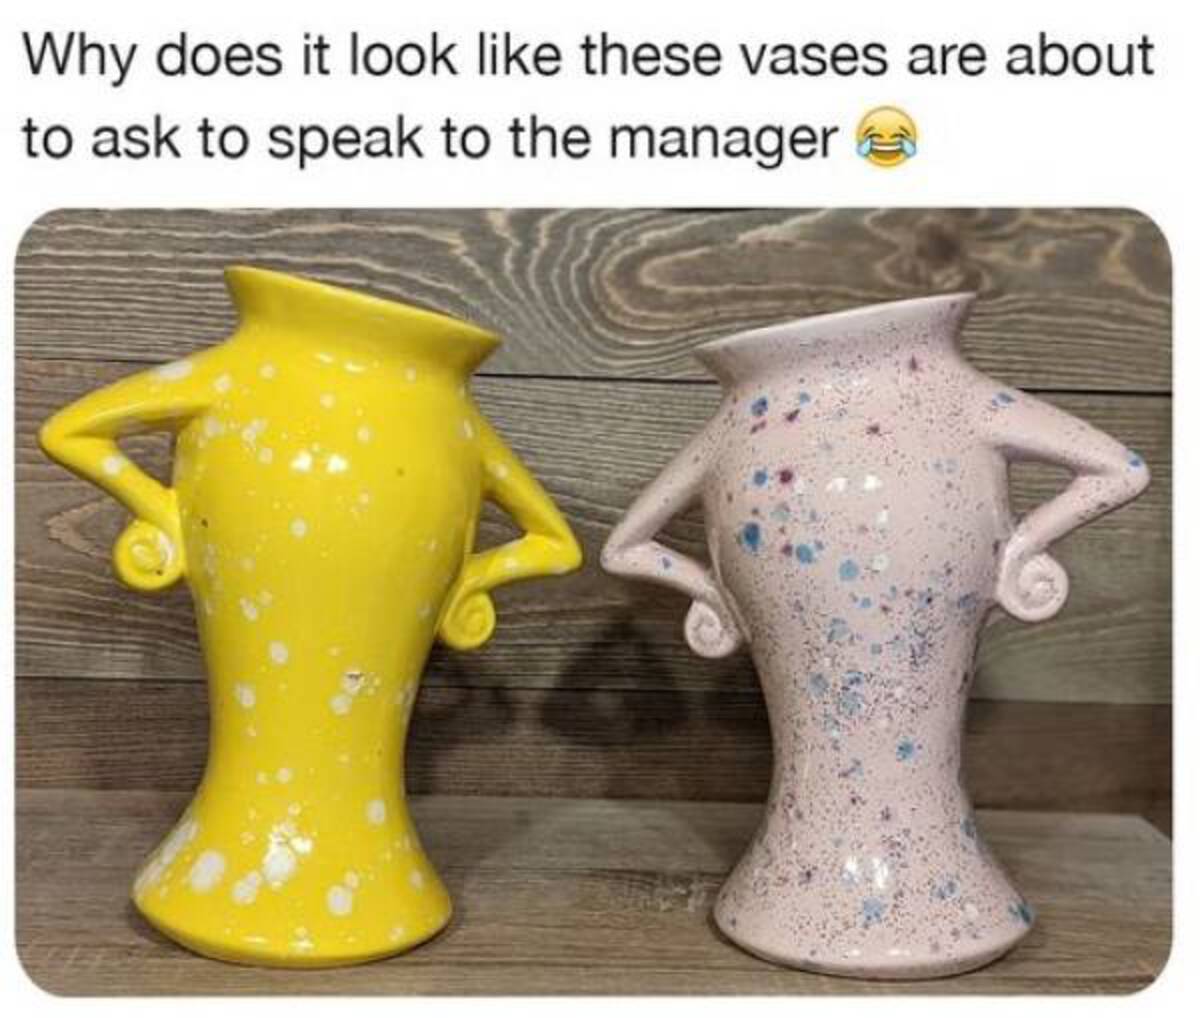 ceramic - Why does it look these vases are about to ask to speak to the manager